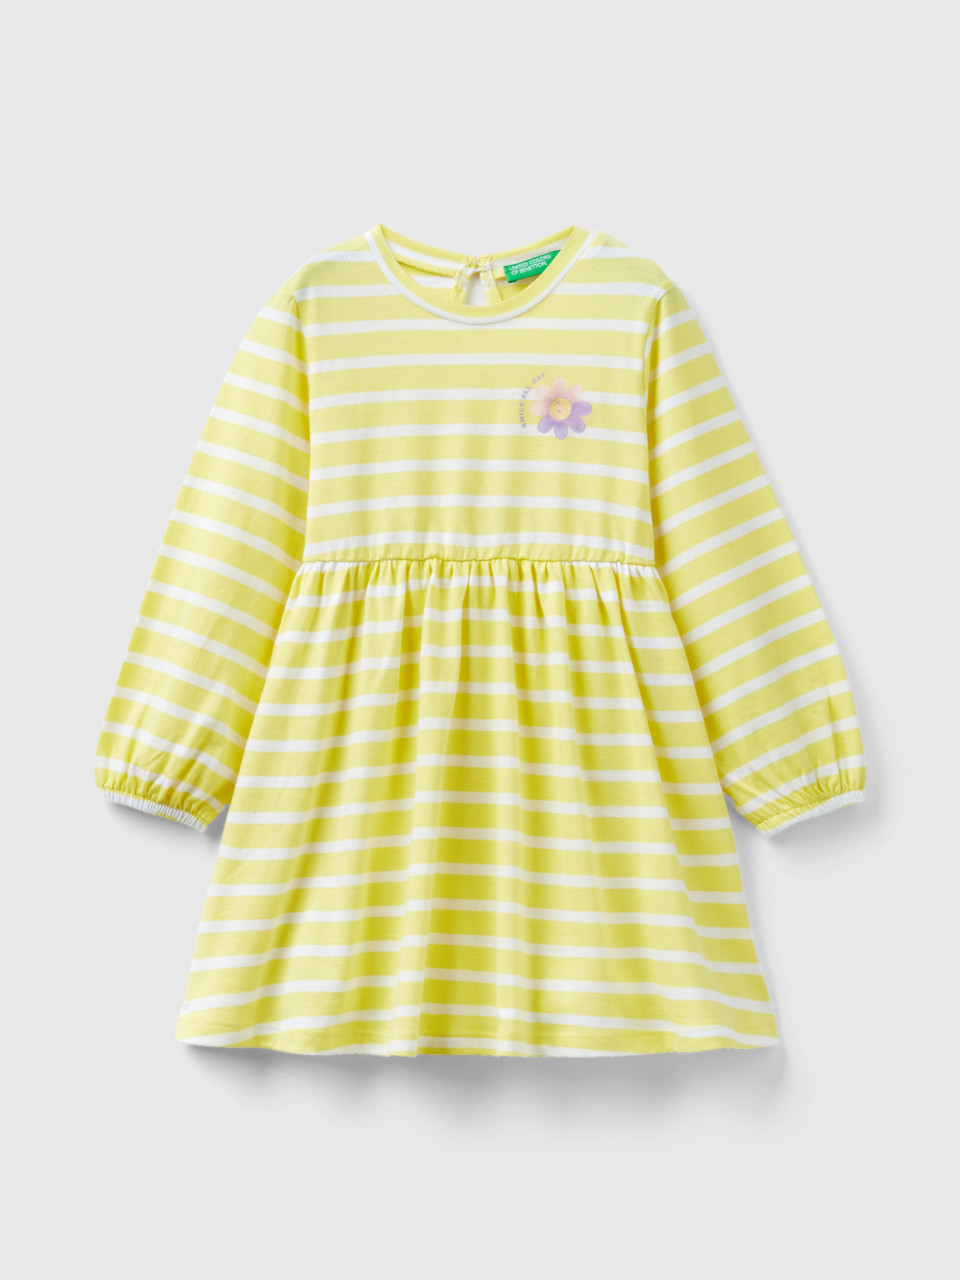 Benetton, Striped Dress In Pure Cotton, Yellow, Kids